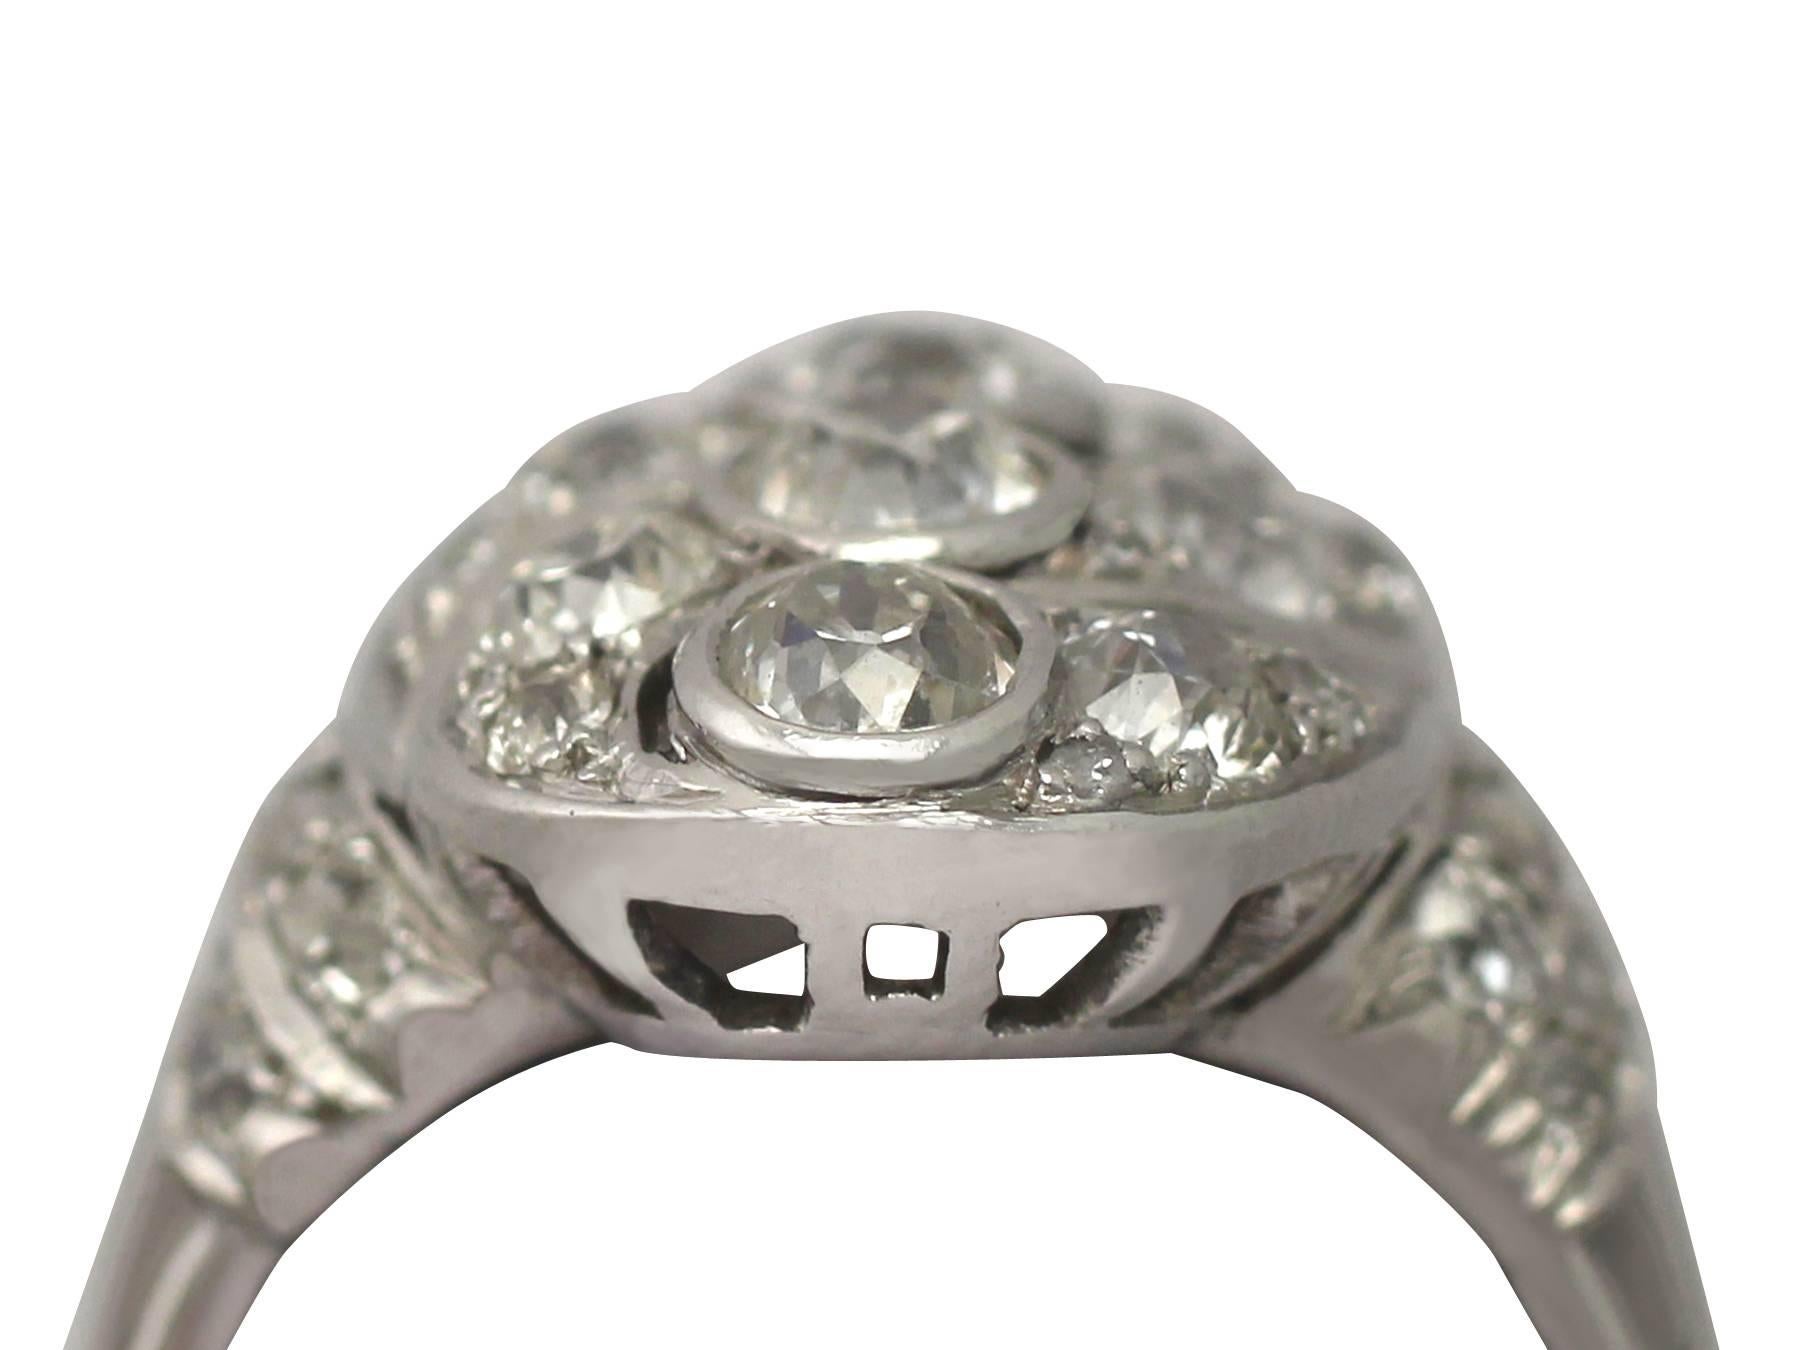 A stunning, fine and impressive vintage German 2.63 carat diamond and 14 karat white gold cocktail ring; part of our diverse vintage jewelry and estate jewelry collections

This stunning, fine and impressive large diamond cocktail ring has been